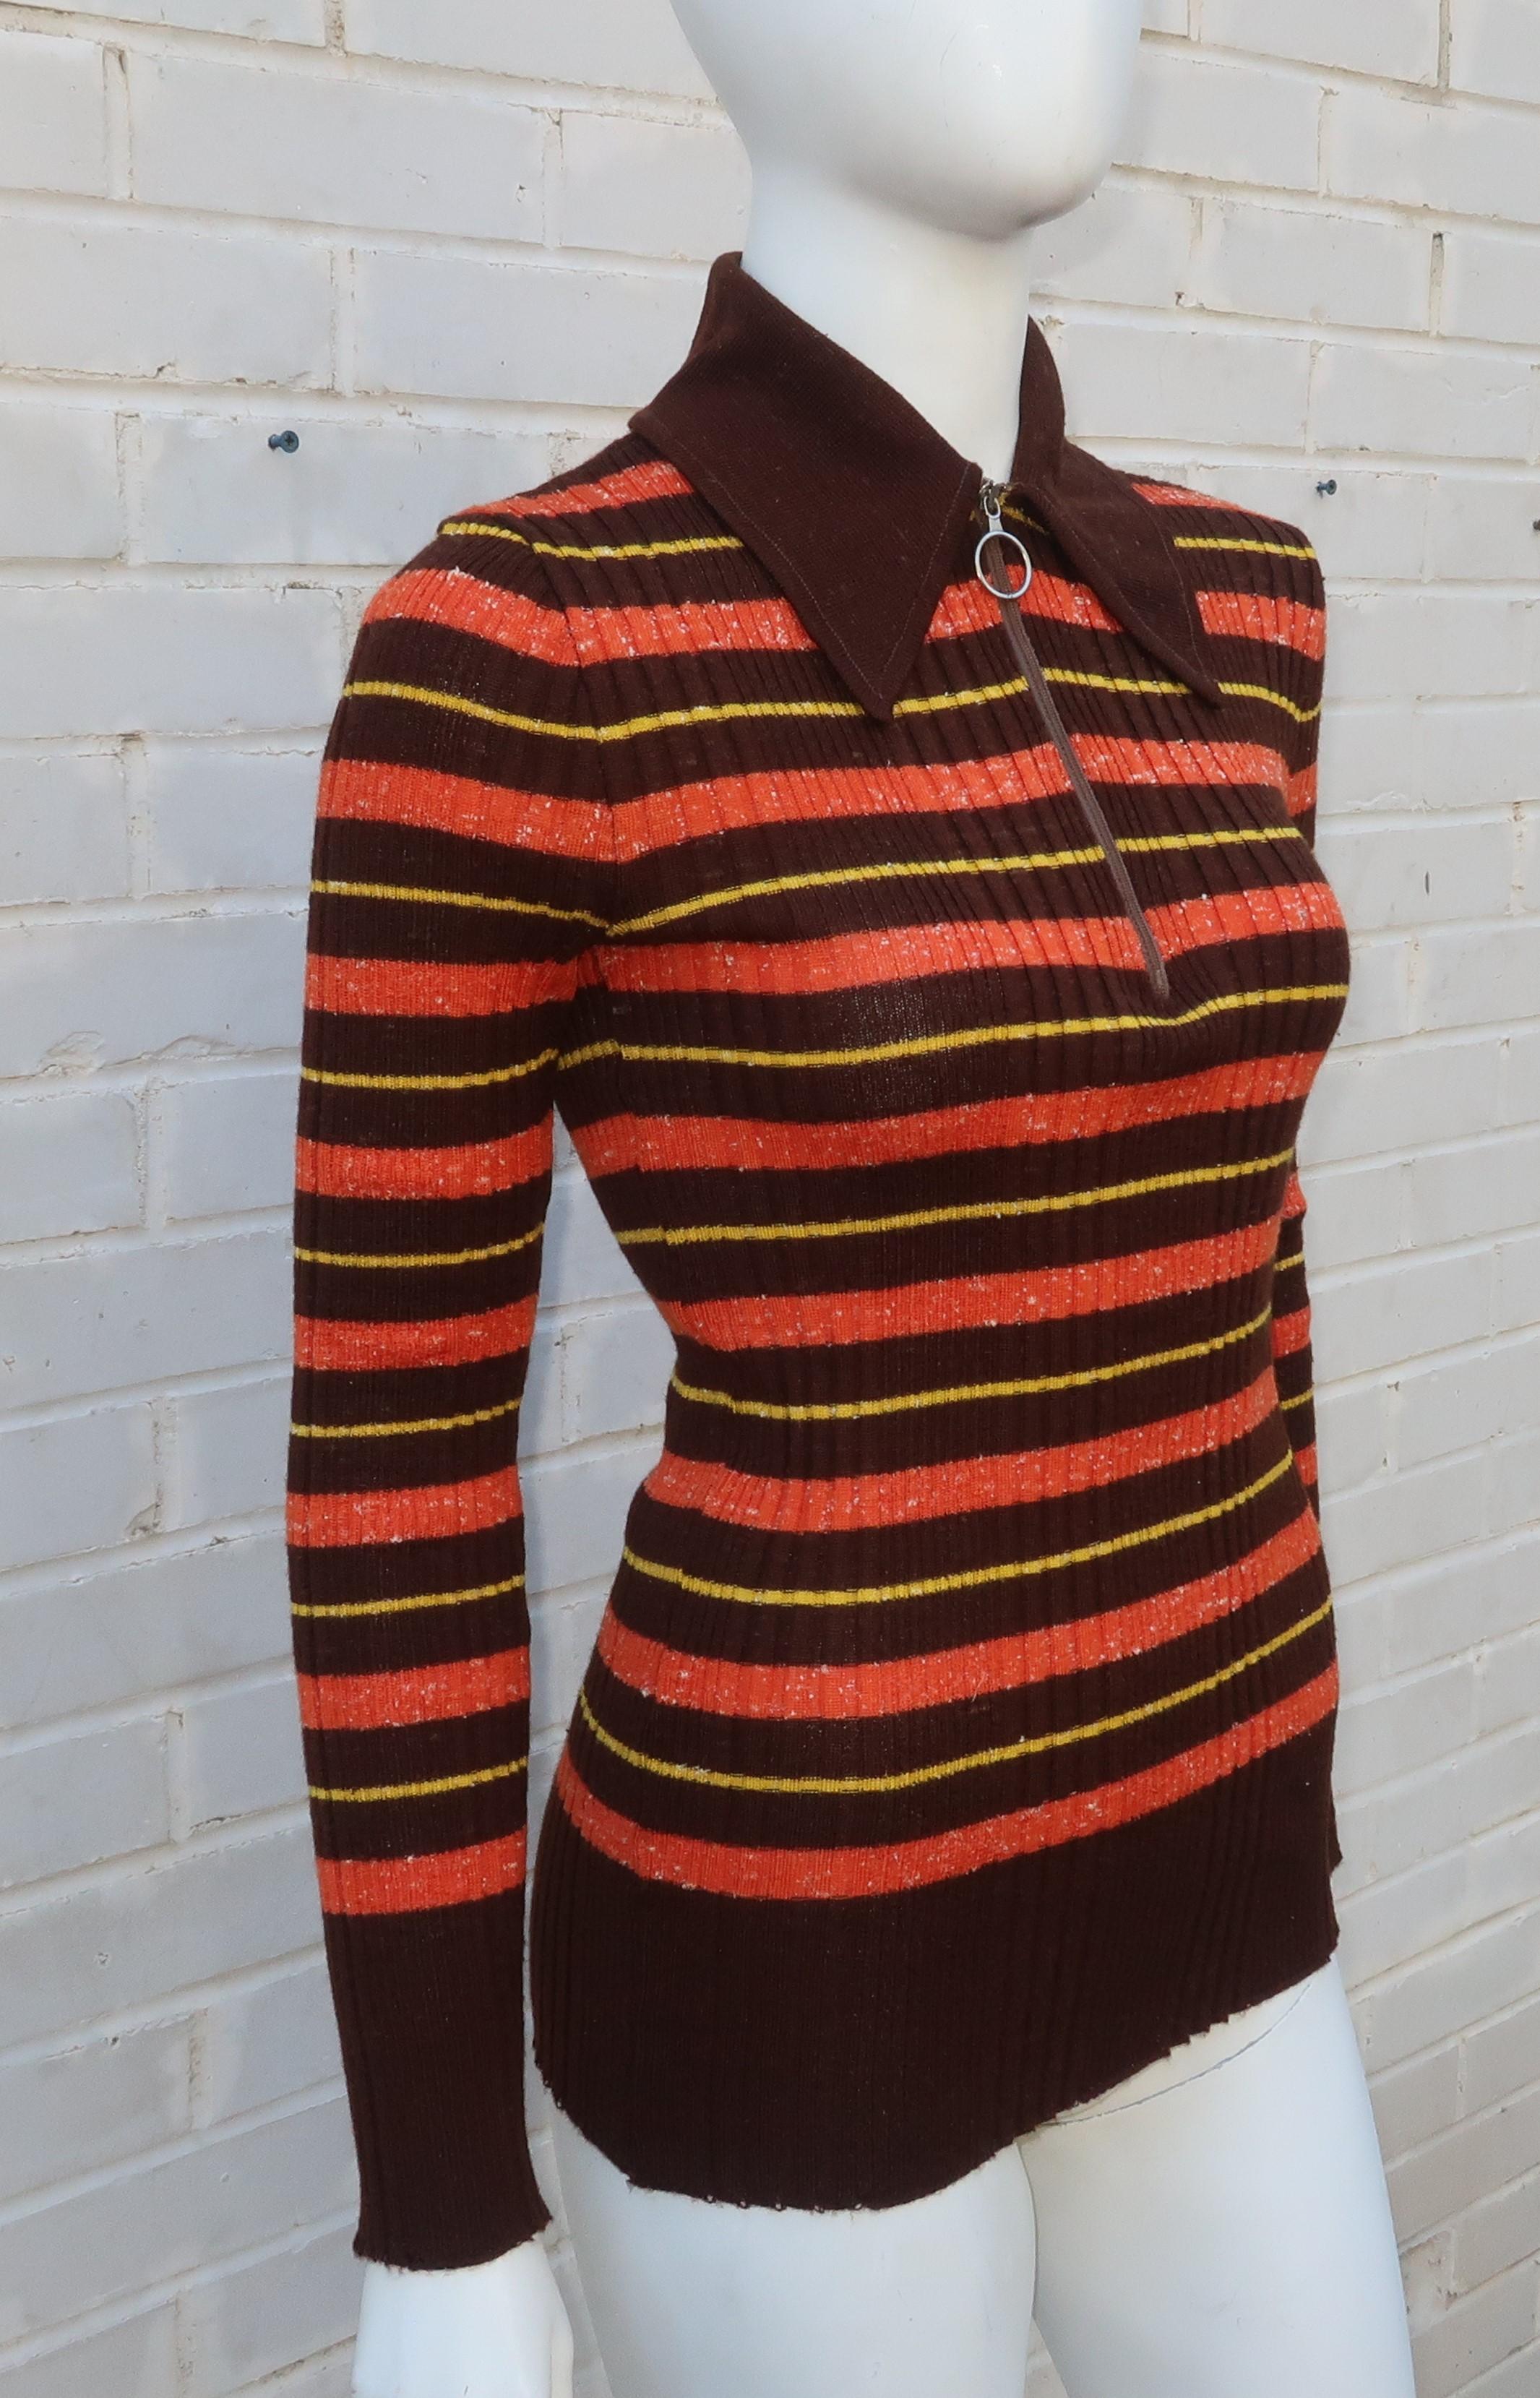 This 1970's ribbed knit Italian Elli top designed by Europecraft is a period perfect sporty look to pair with your favorite wide legged jeans.  The pullover construction and body conscious cling provides comfort and a sassy style with a ringed